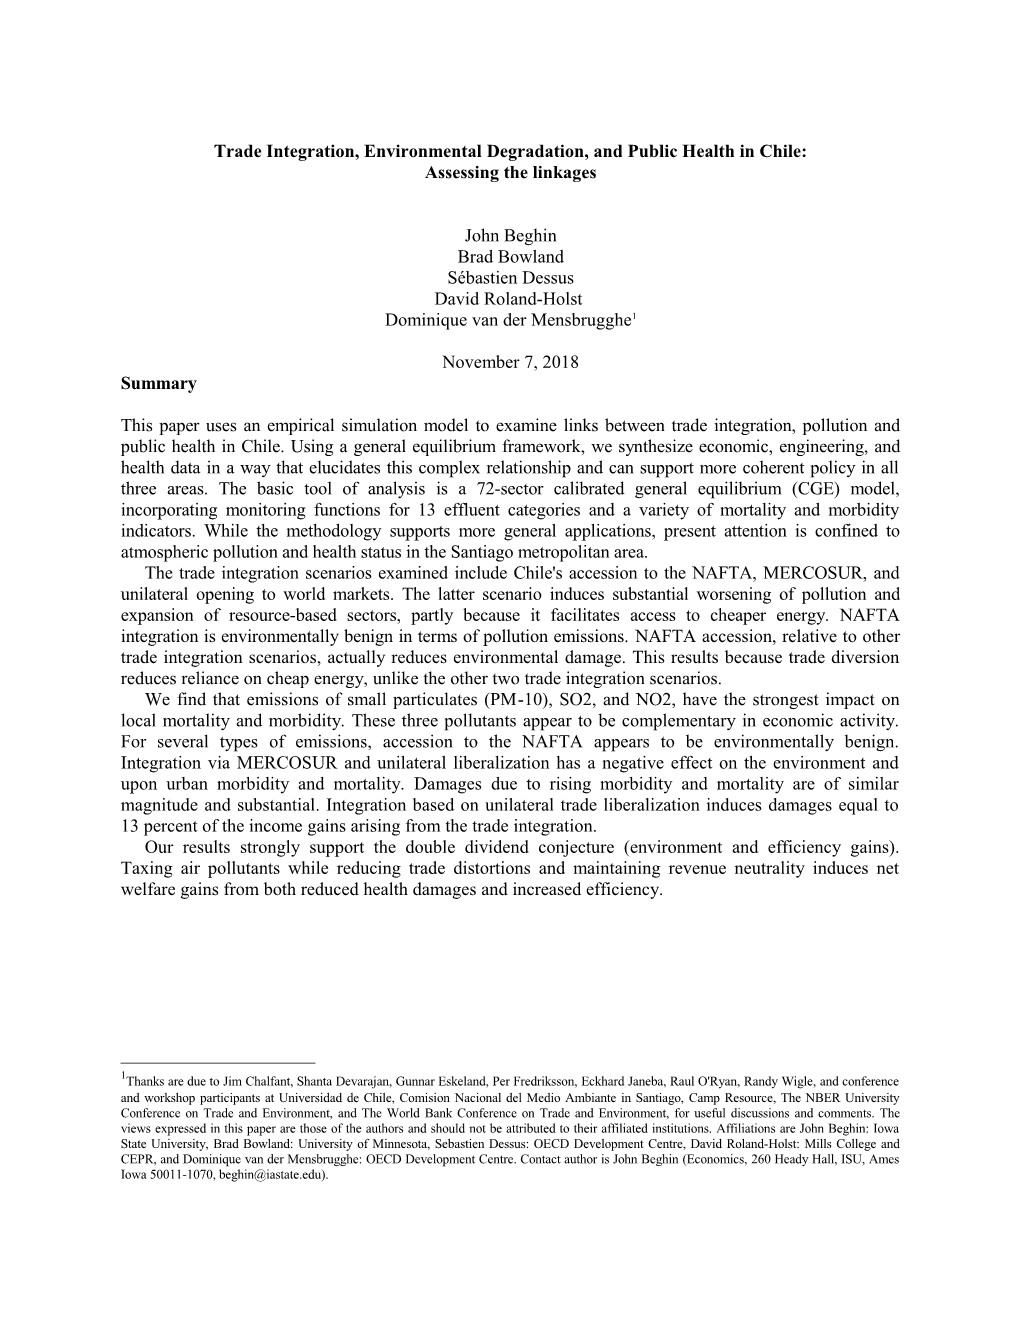 Trade Integration, Environmental Degradation, and Public Health in Chile